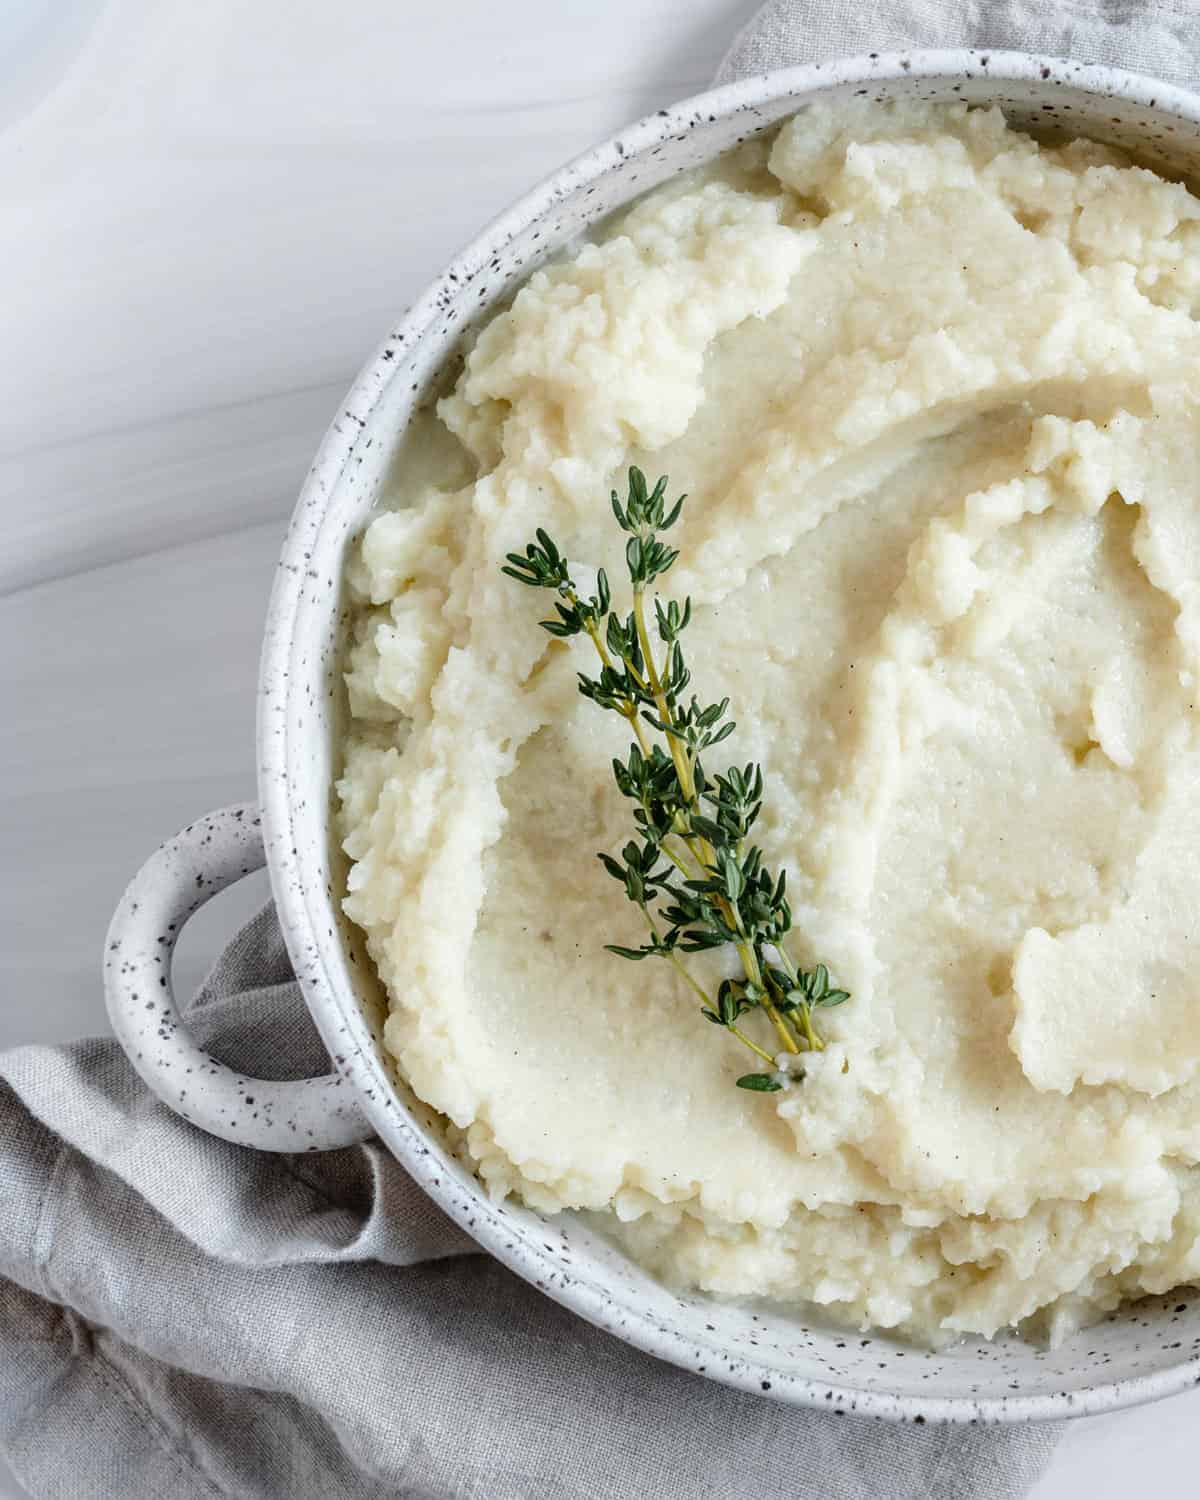 completed mashed cauliflower in a white dish against white background